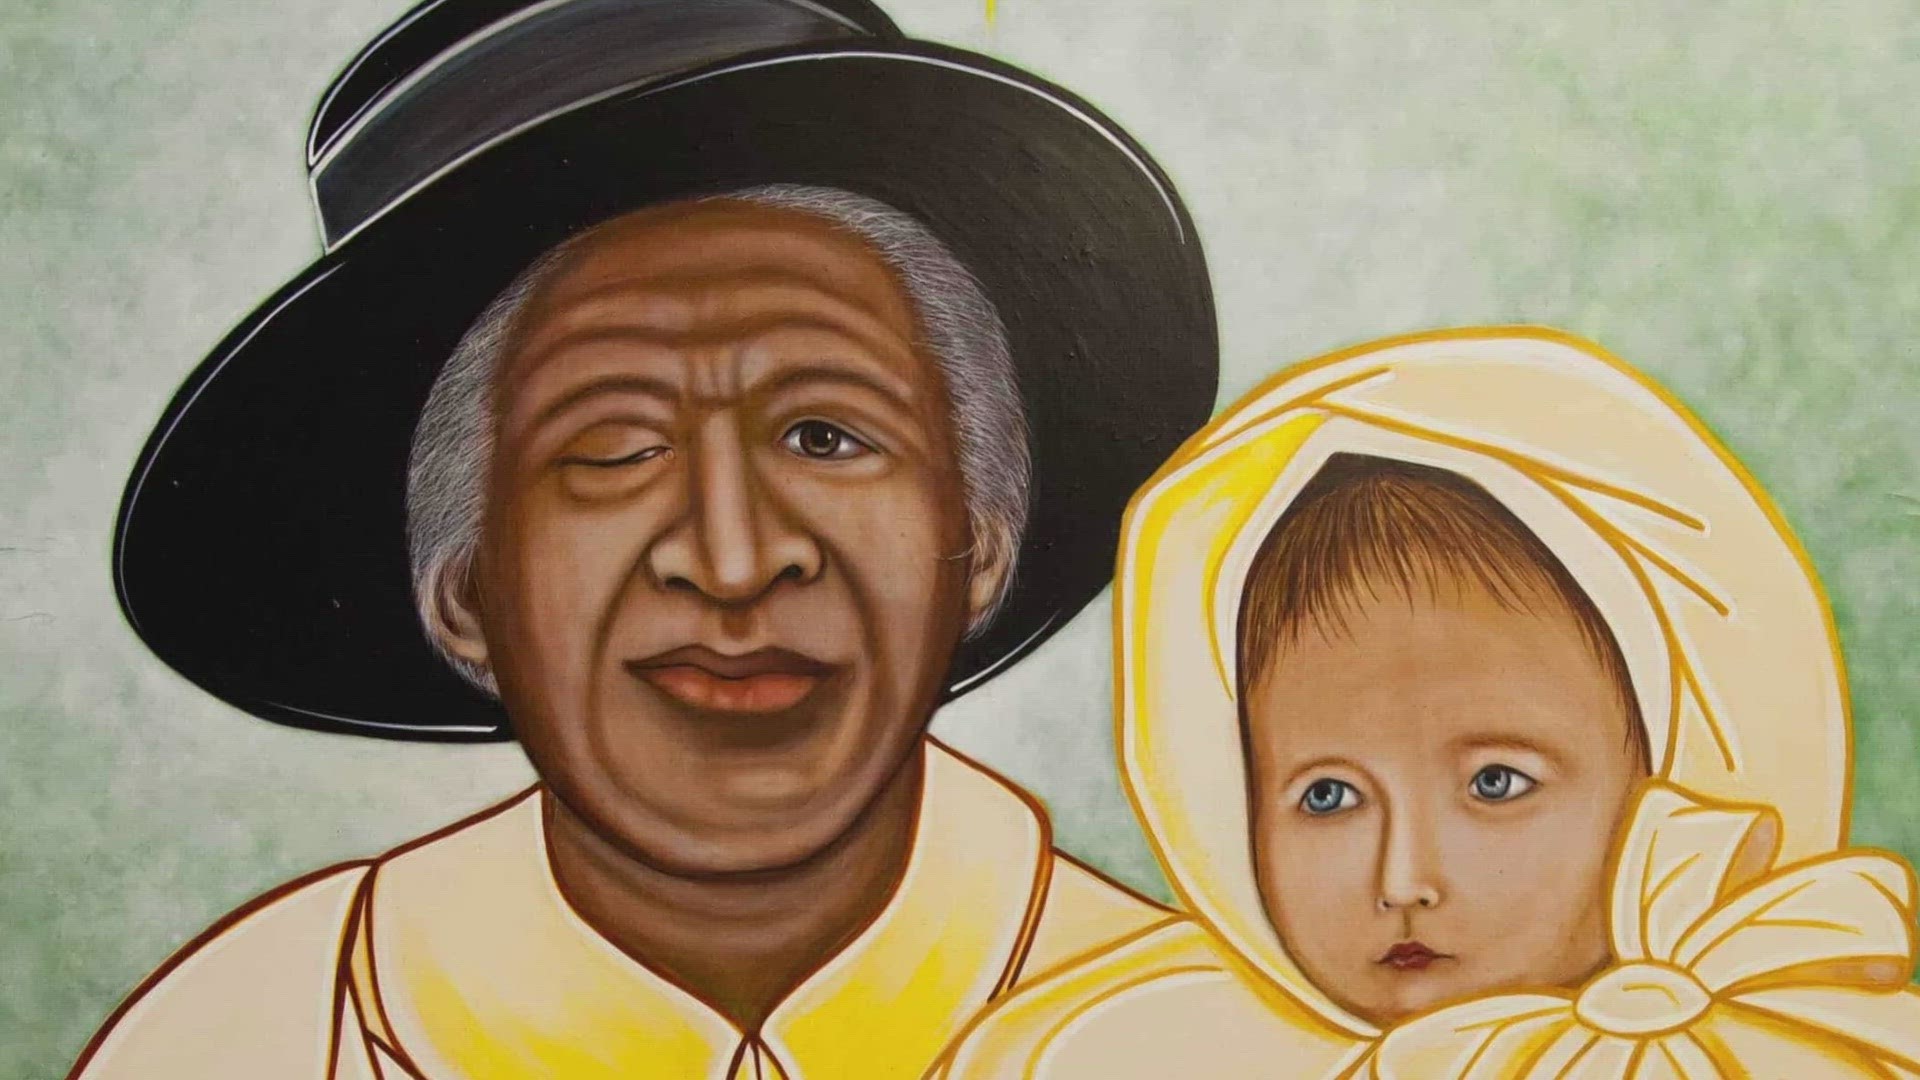 Julia Greeley was emancipated from slavery and came to Denver in the 1800s. She was known as a devout Catholic who tirelessly served the needy.